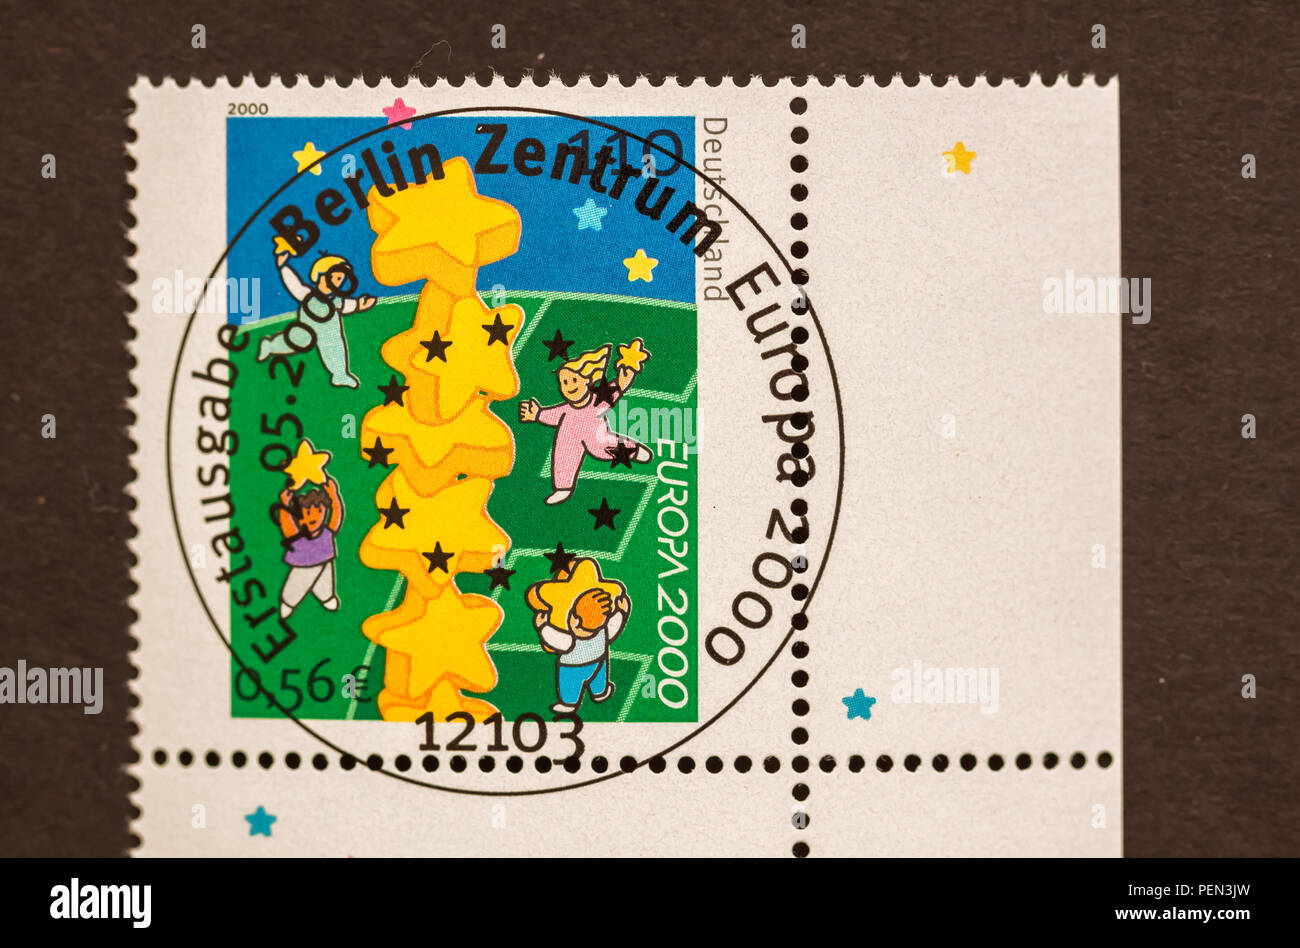 German postage stamp with first day of issue postmark to commemorate Europa 2000. Stock Photo